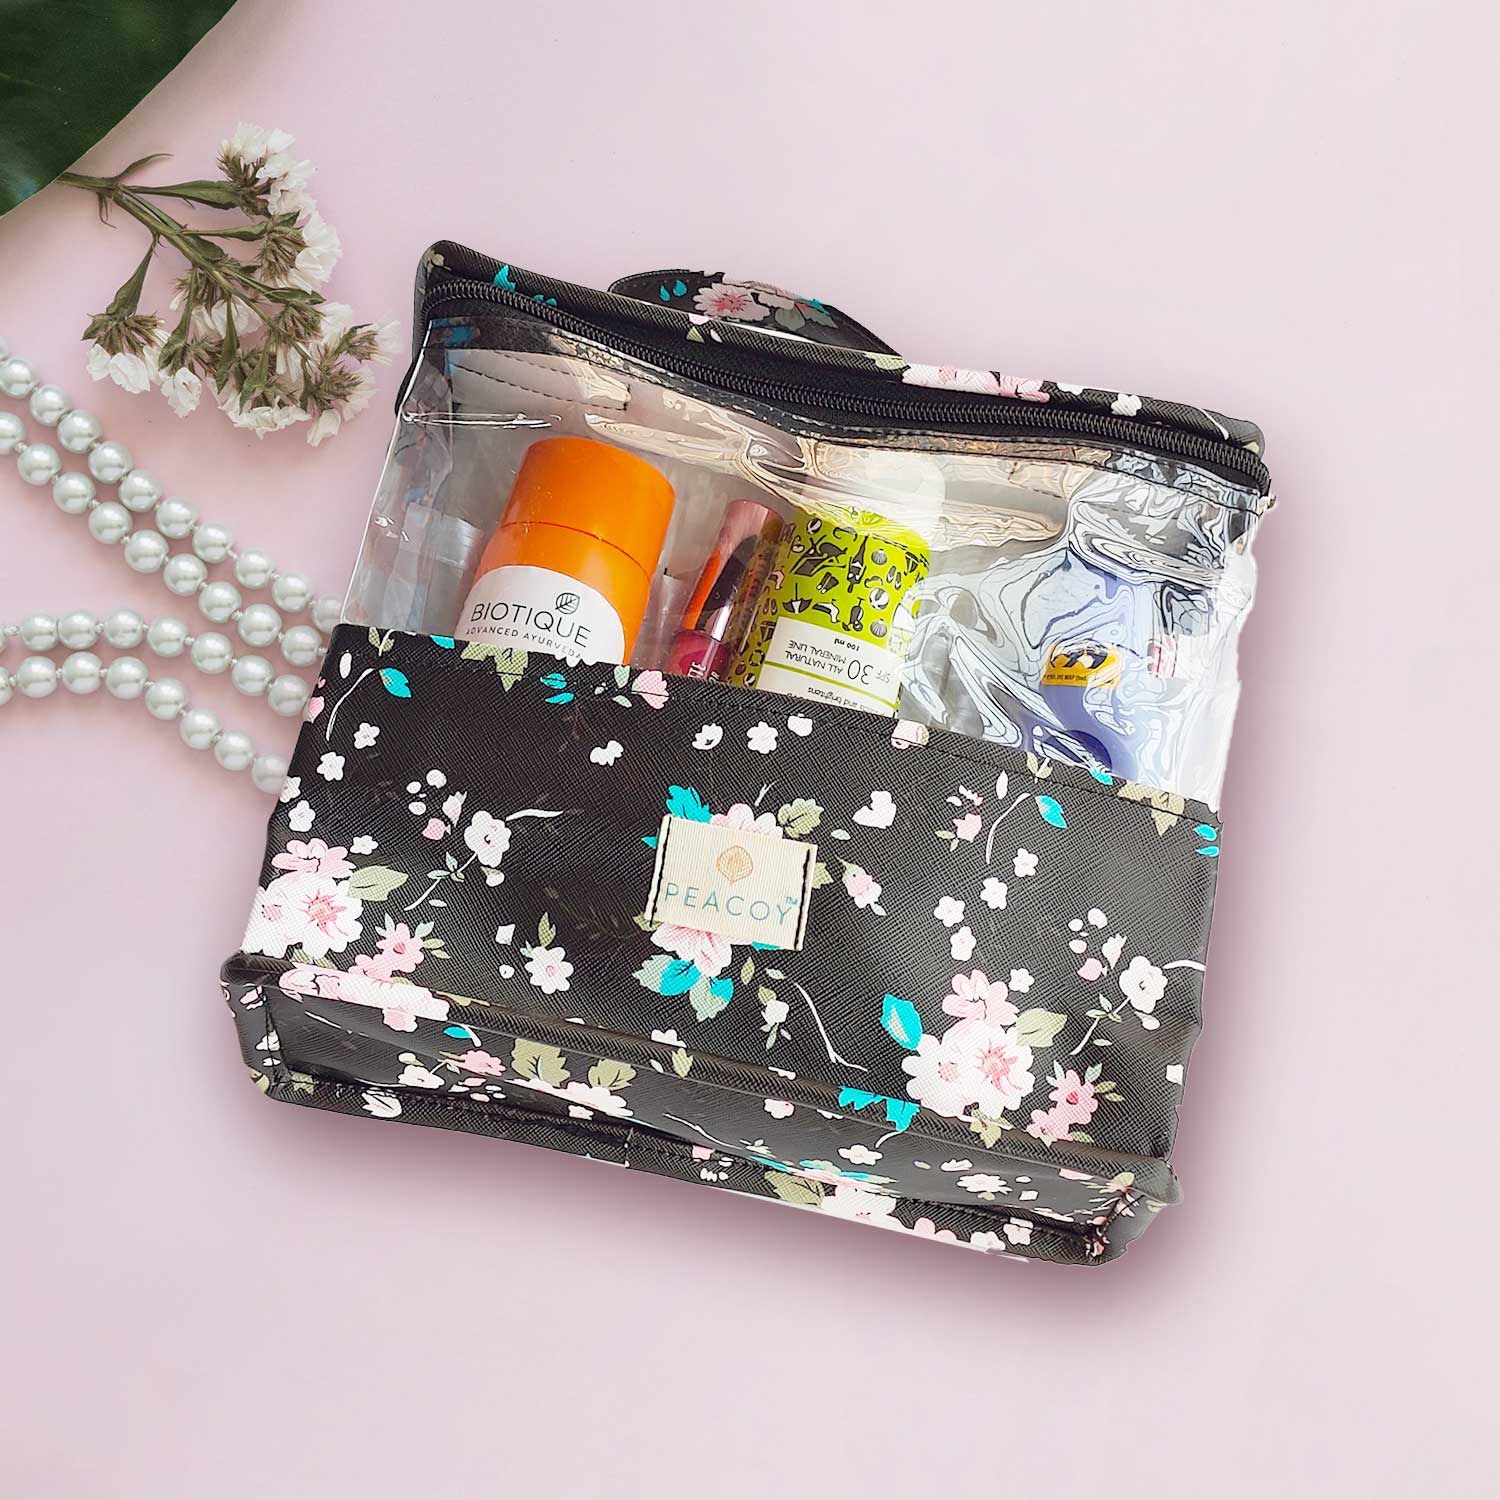 Black Travel Pouches, Cosmetic Zipper Pouches, Makeup Organizers, Toiletry Bag for Traveling